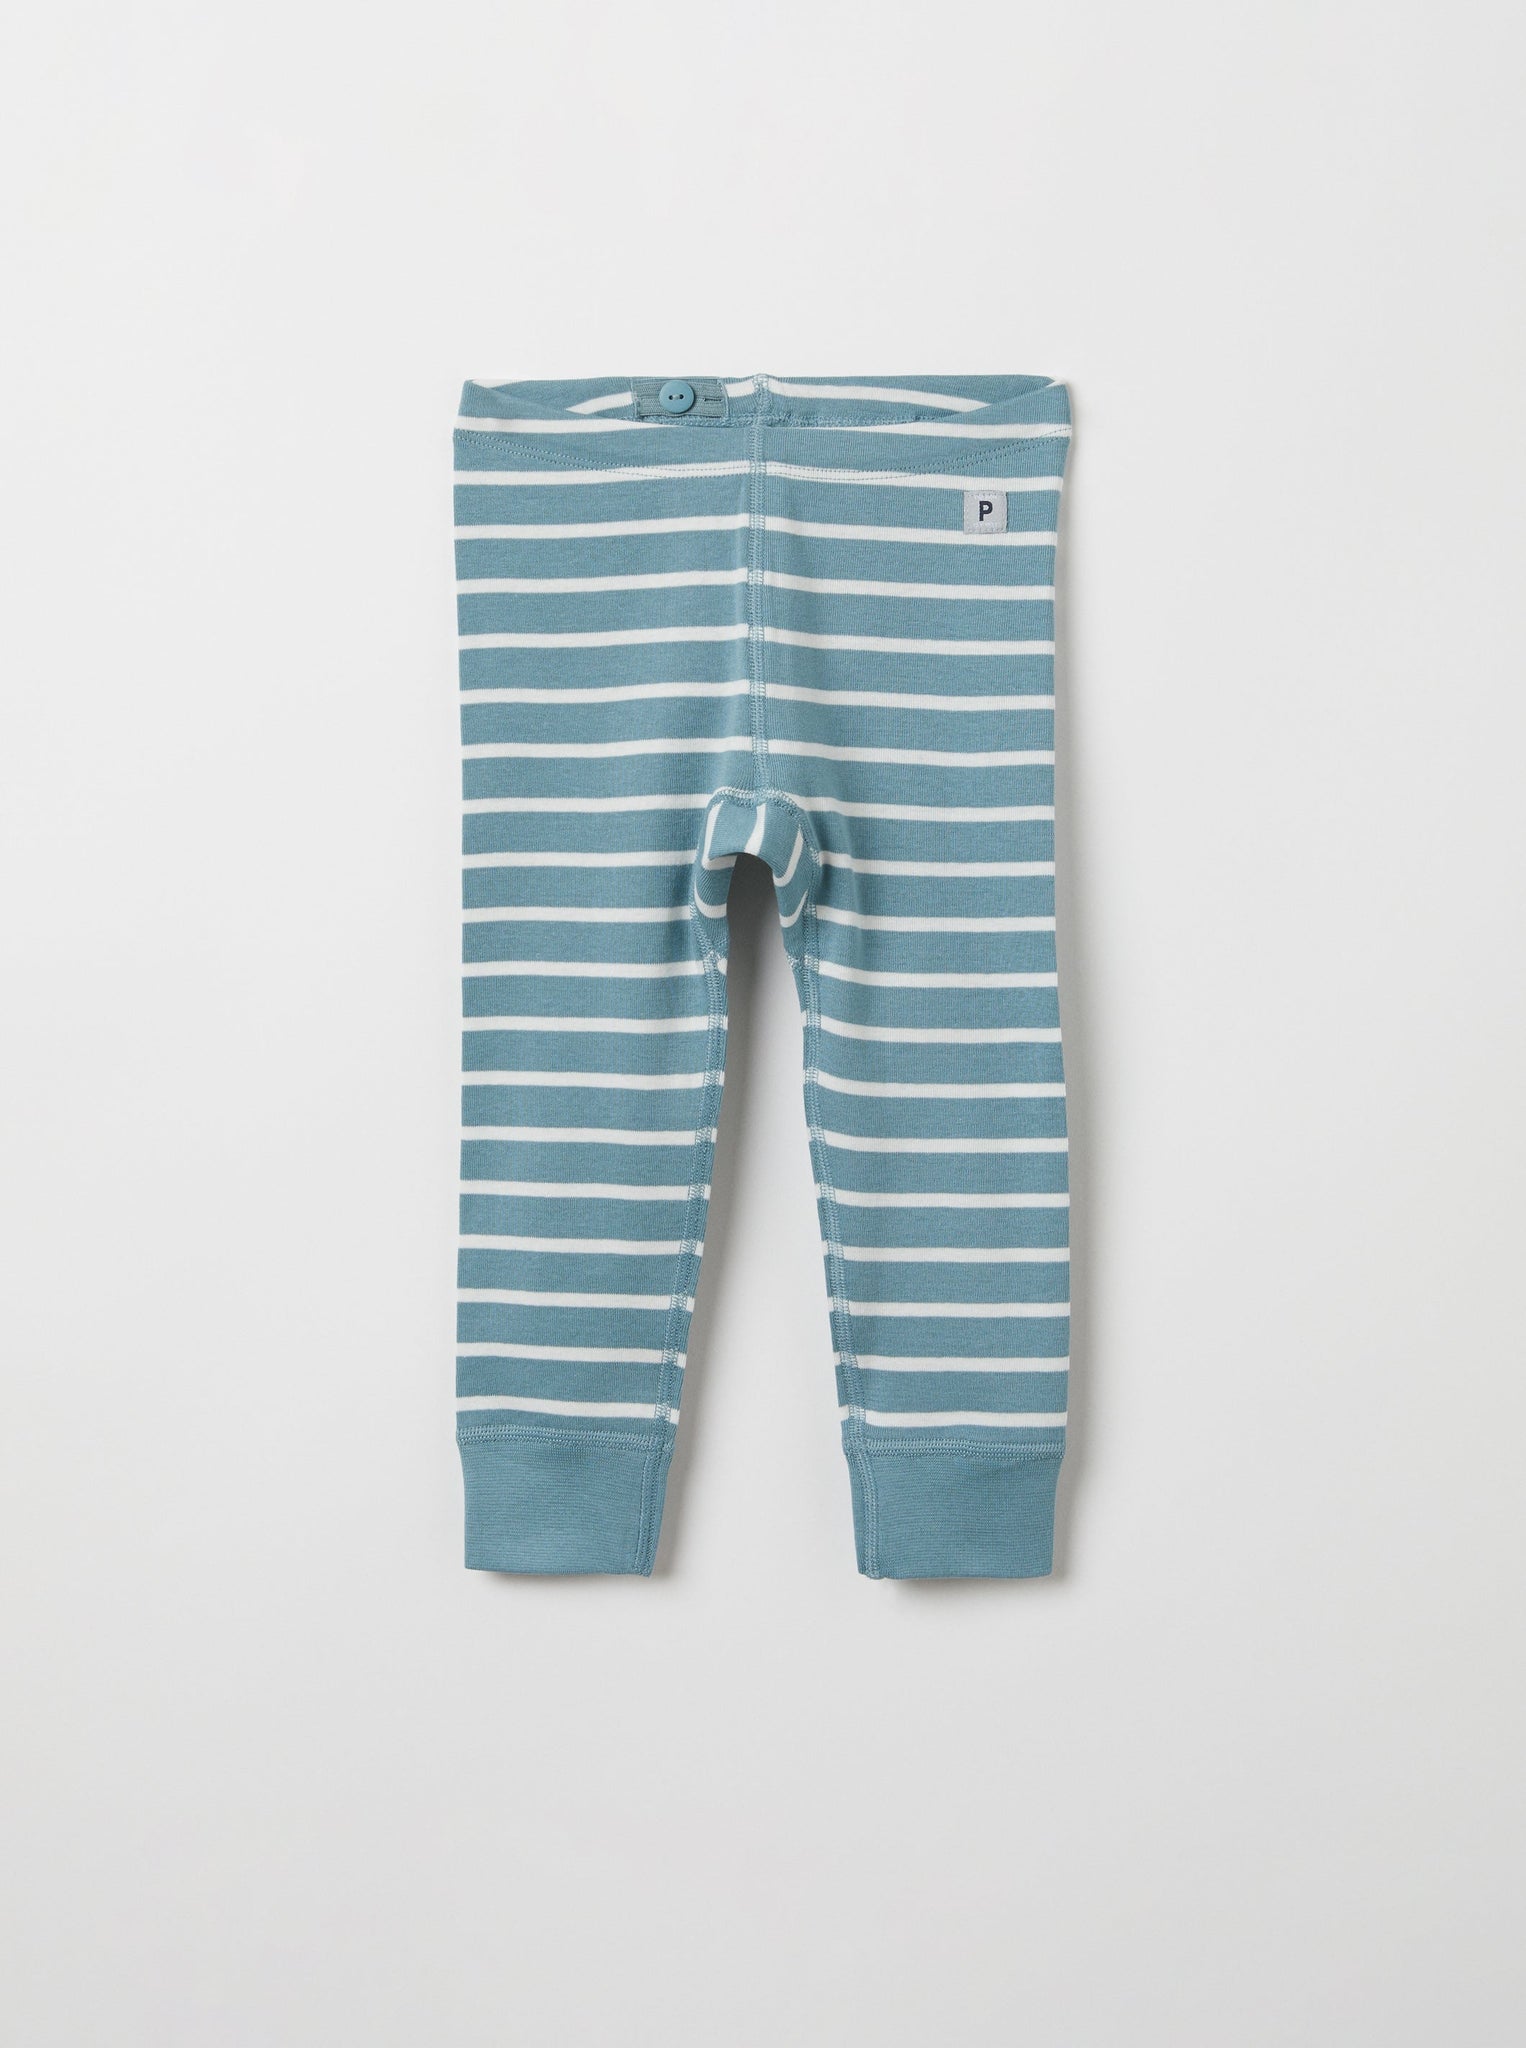 Organic Cotton Blue Baby Leggings from the Polarn O. Pyret babywear collection. Ethically produced kids clothing.